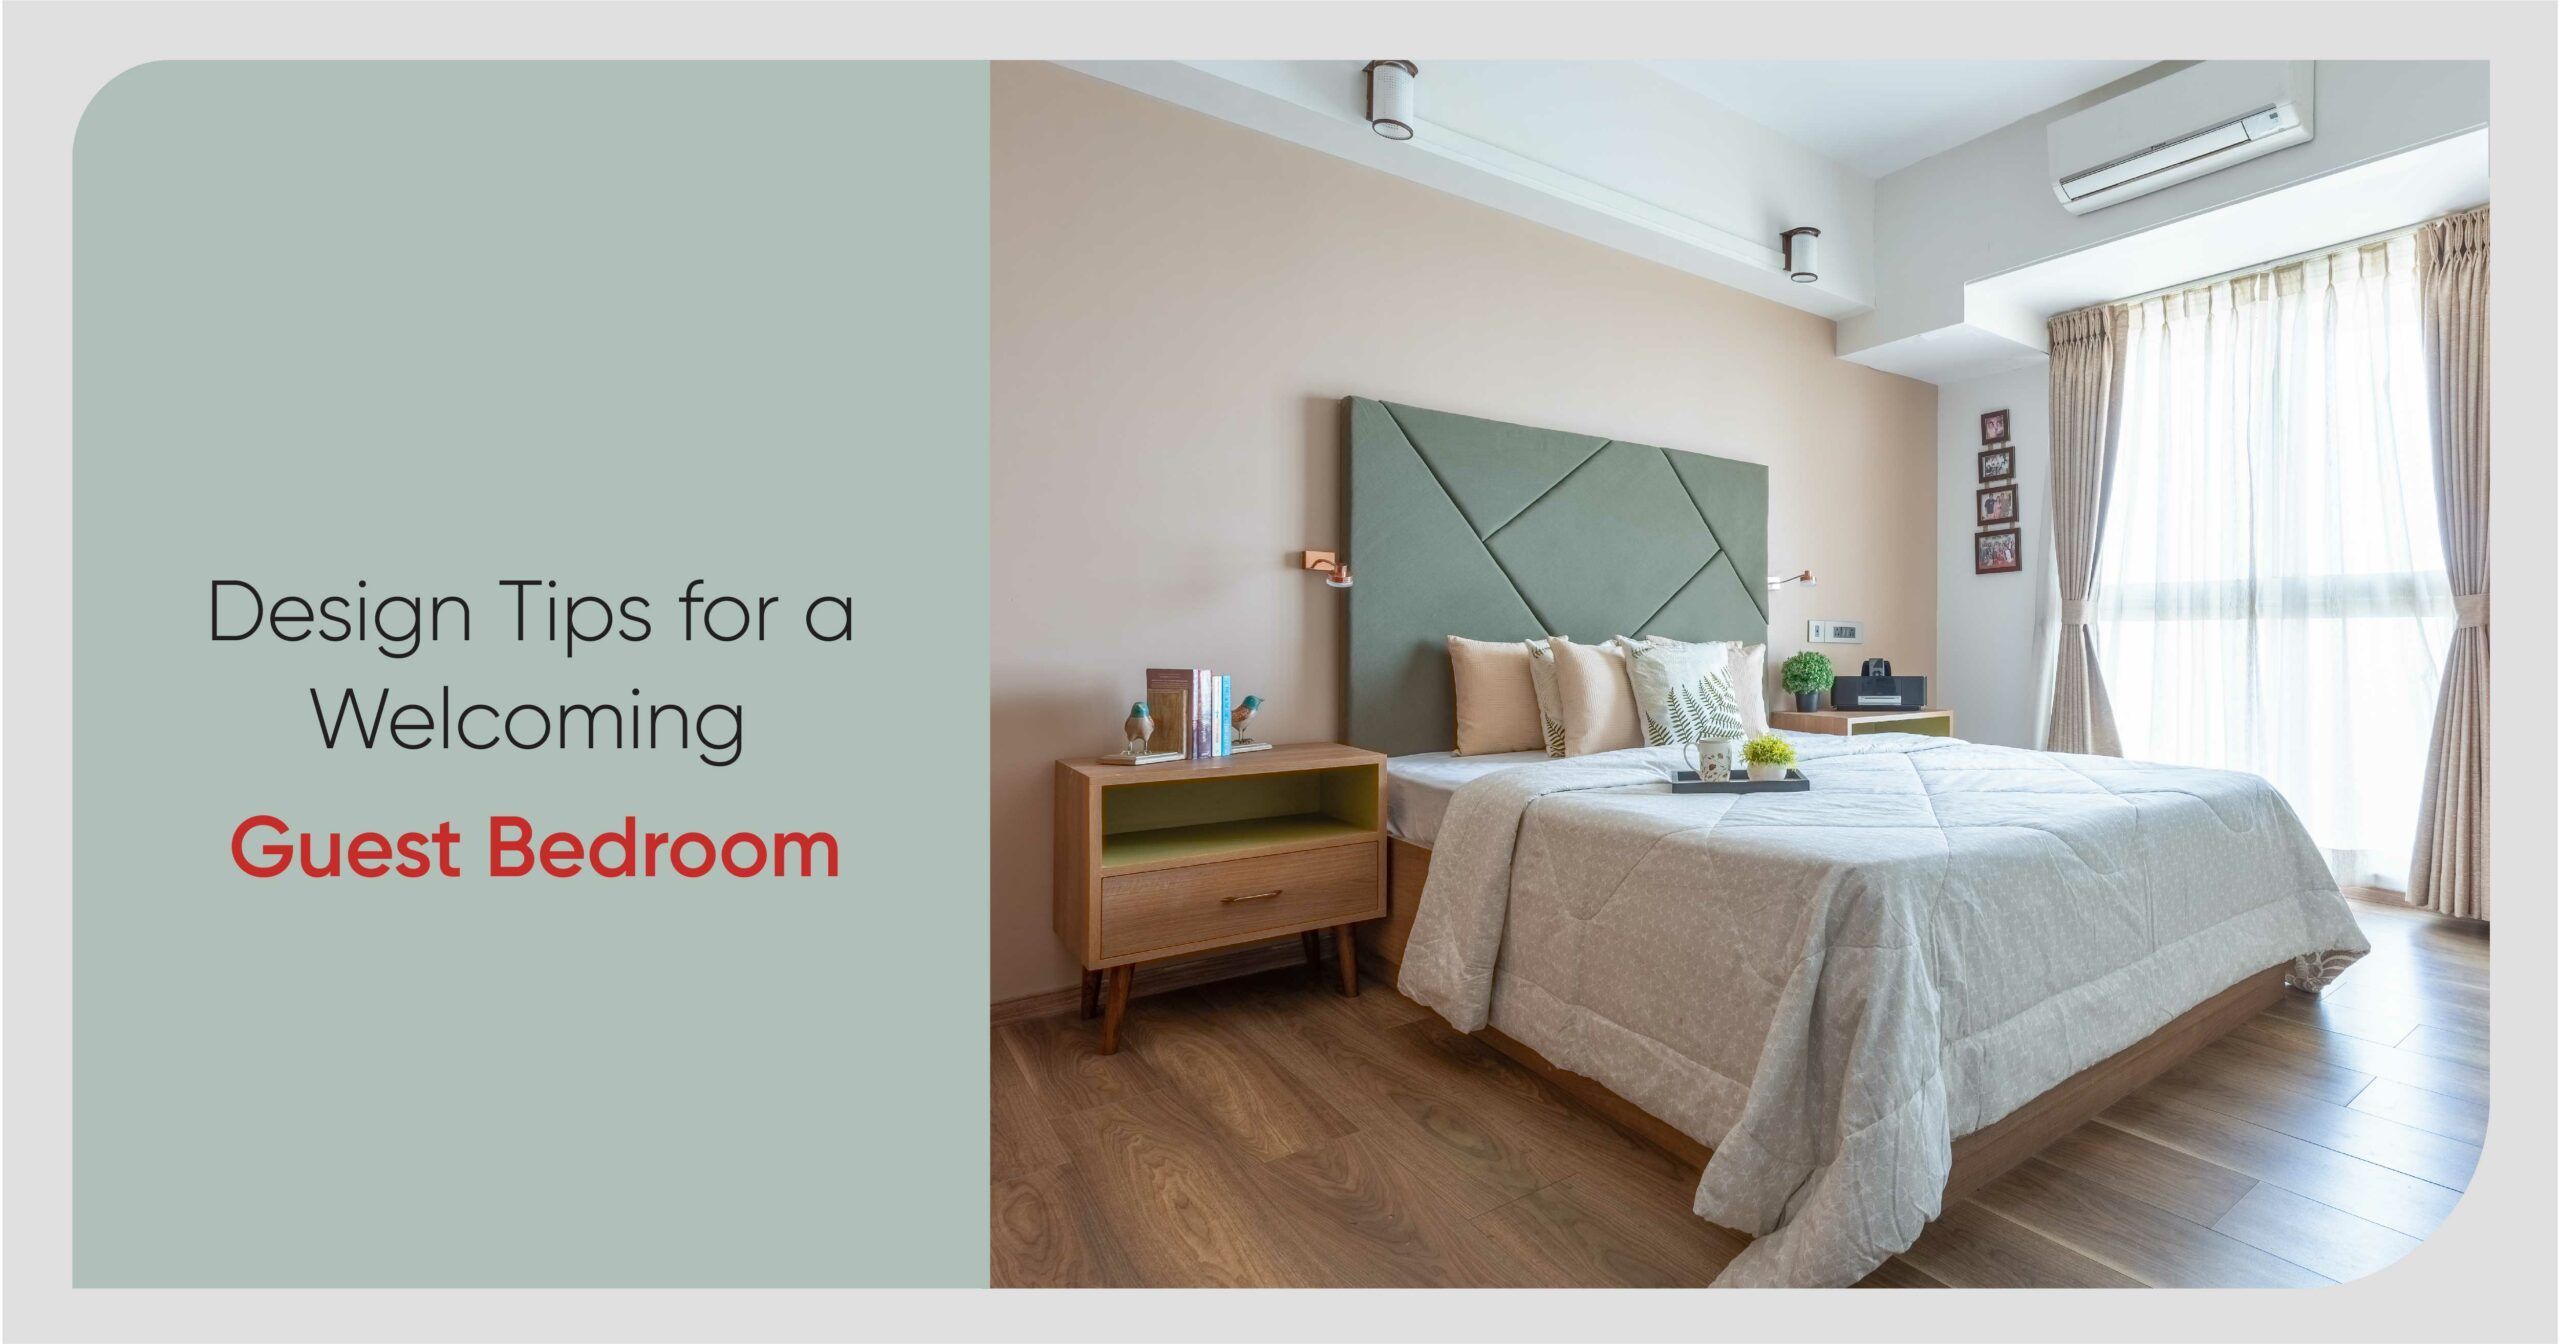 5 Steps to Turn Your Spare Room Into a Comfy Guest Room